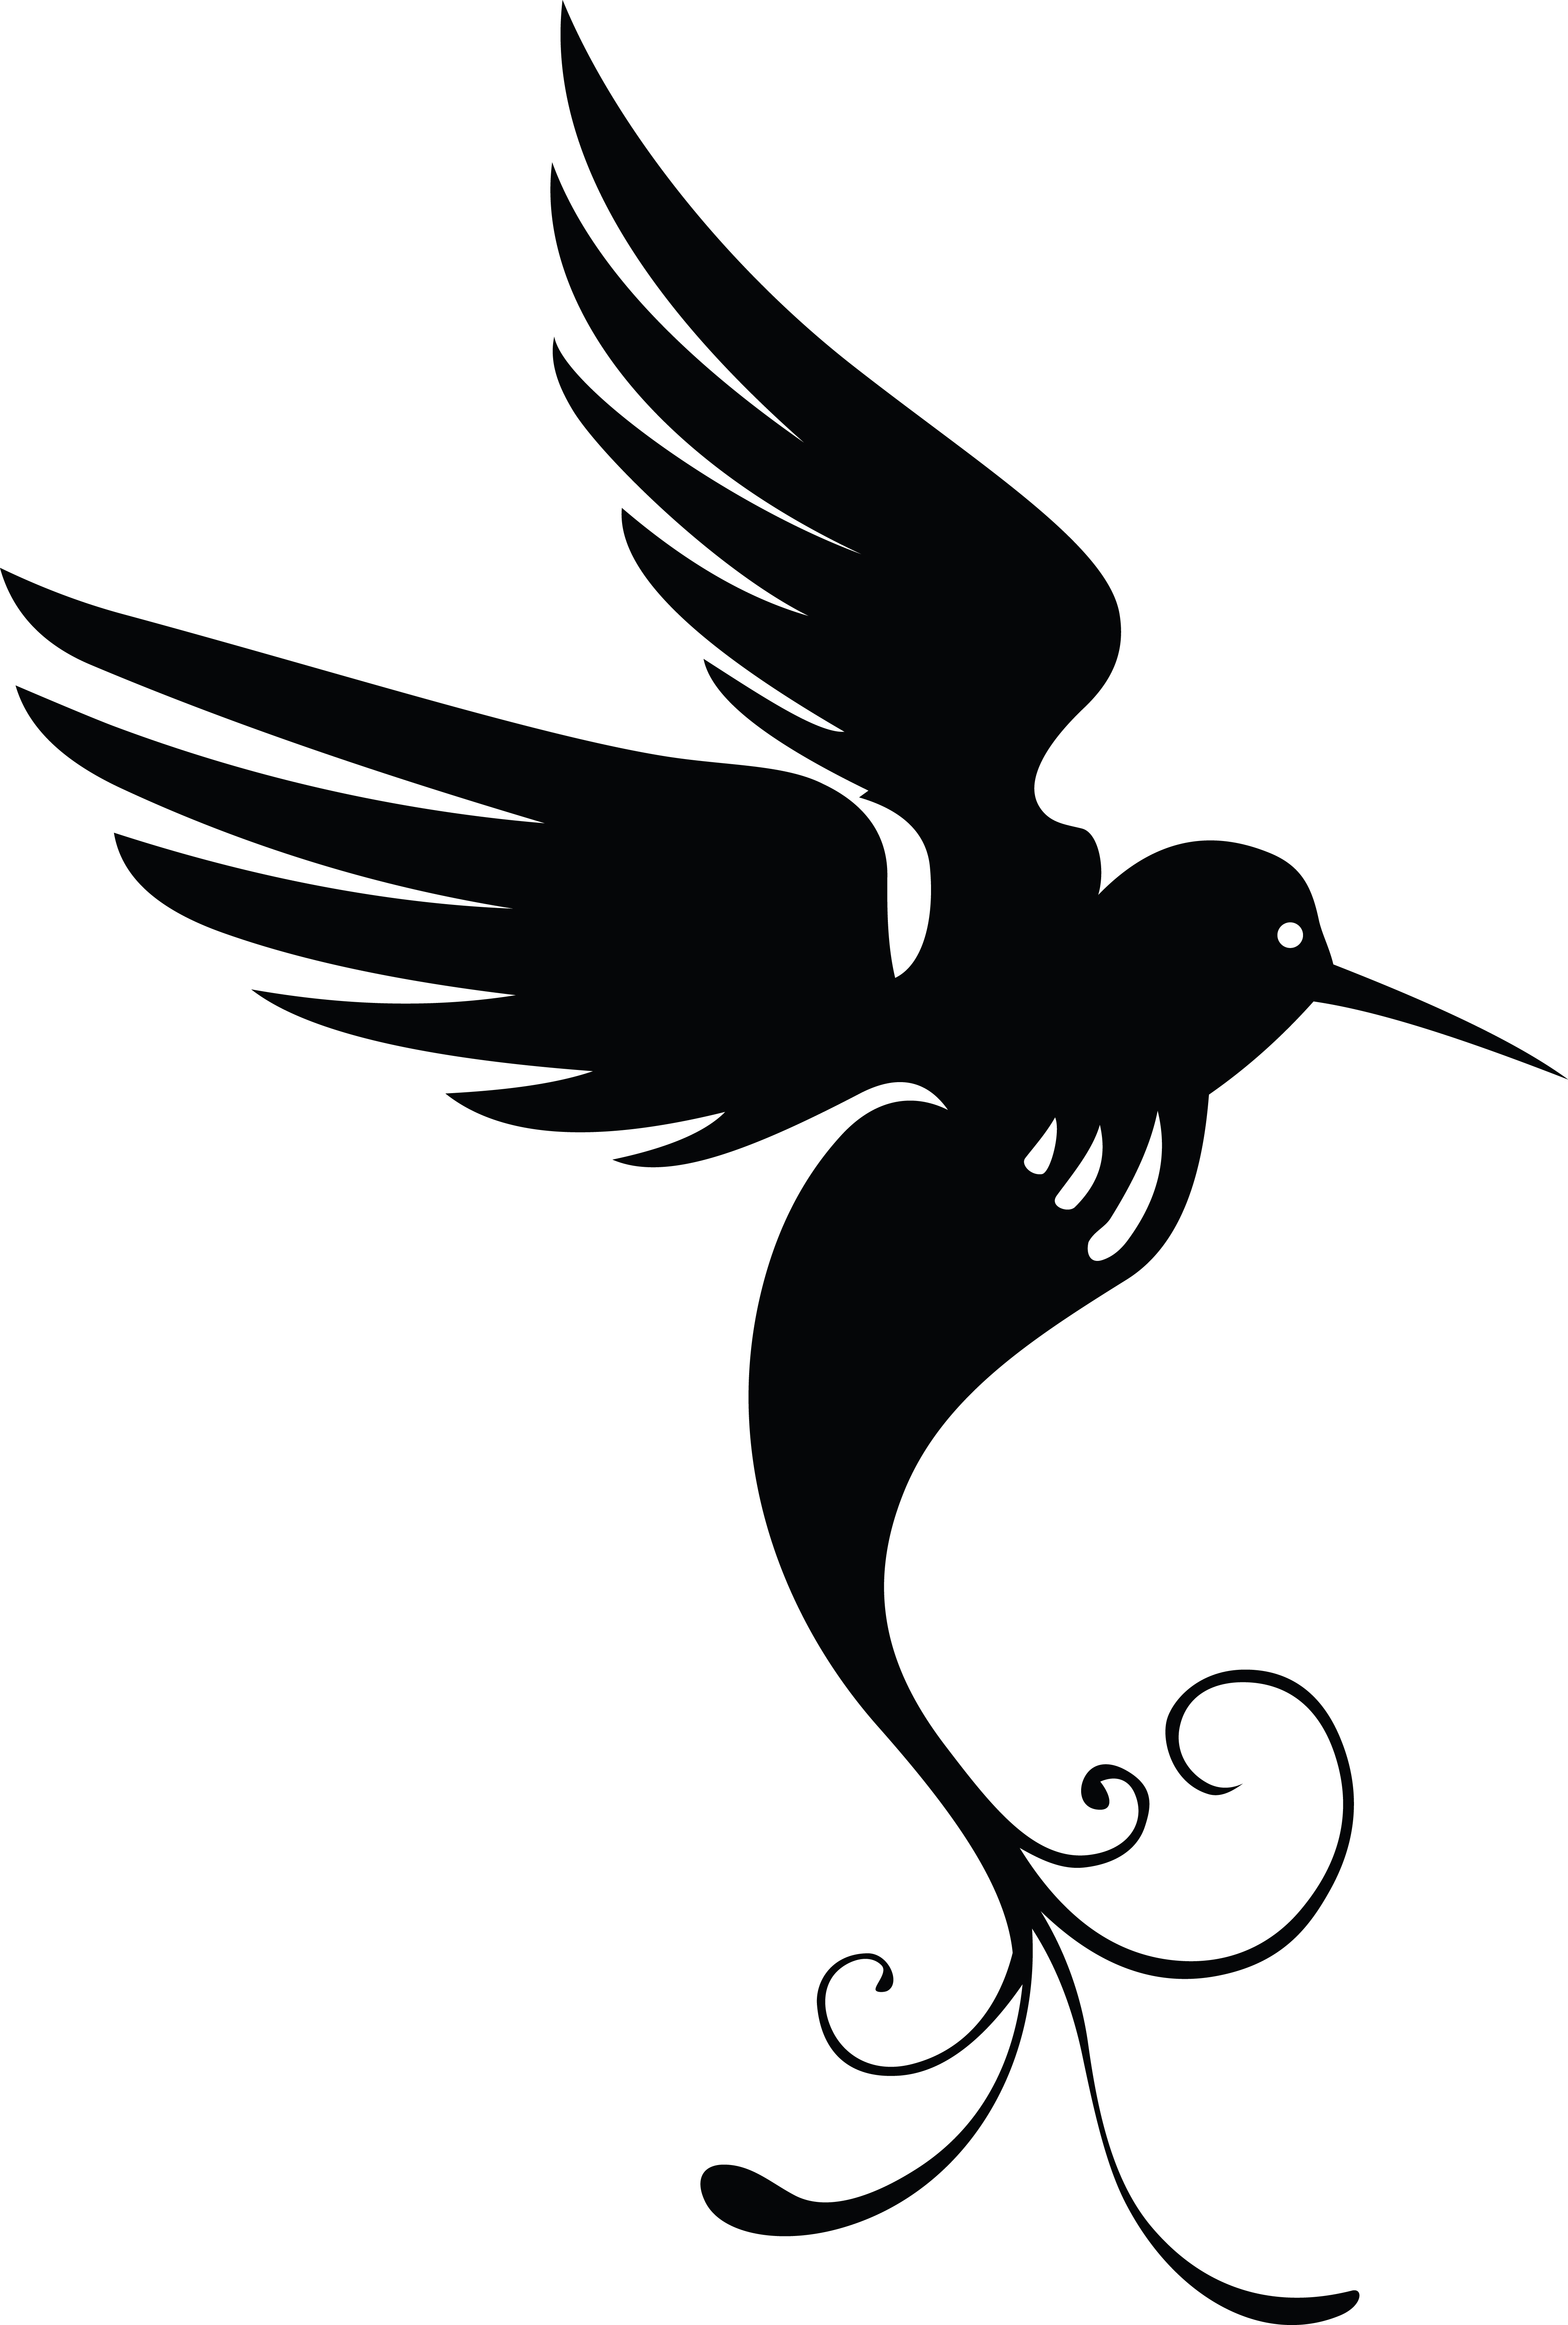 Download Free Clipart Of A Black and White HummingBird Silhouette